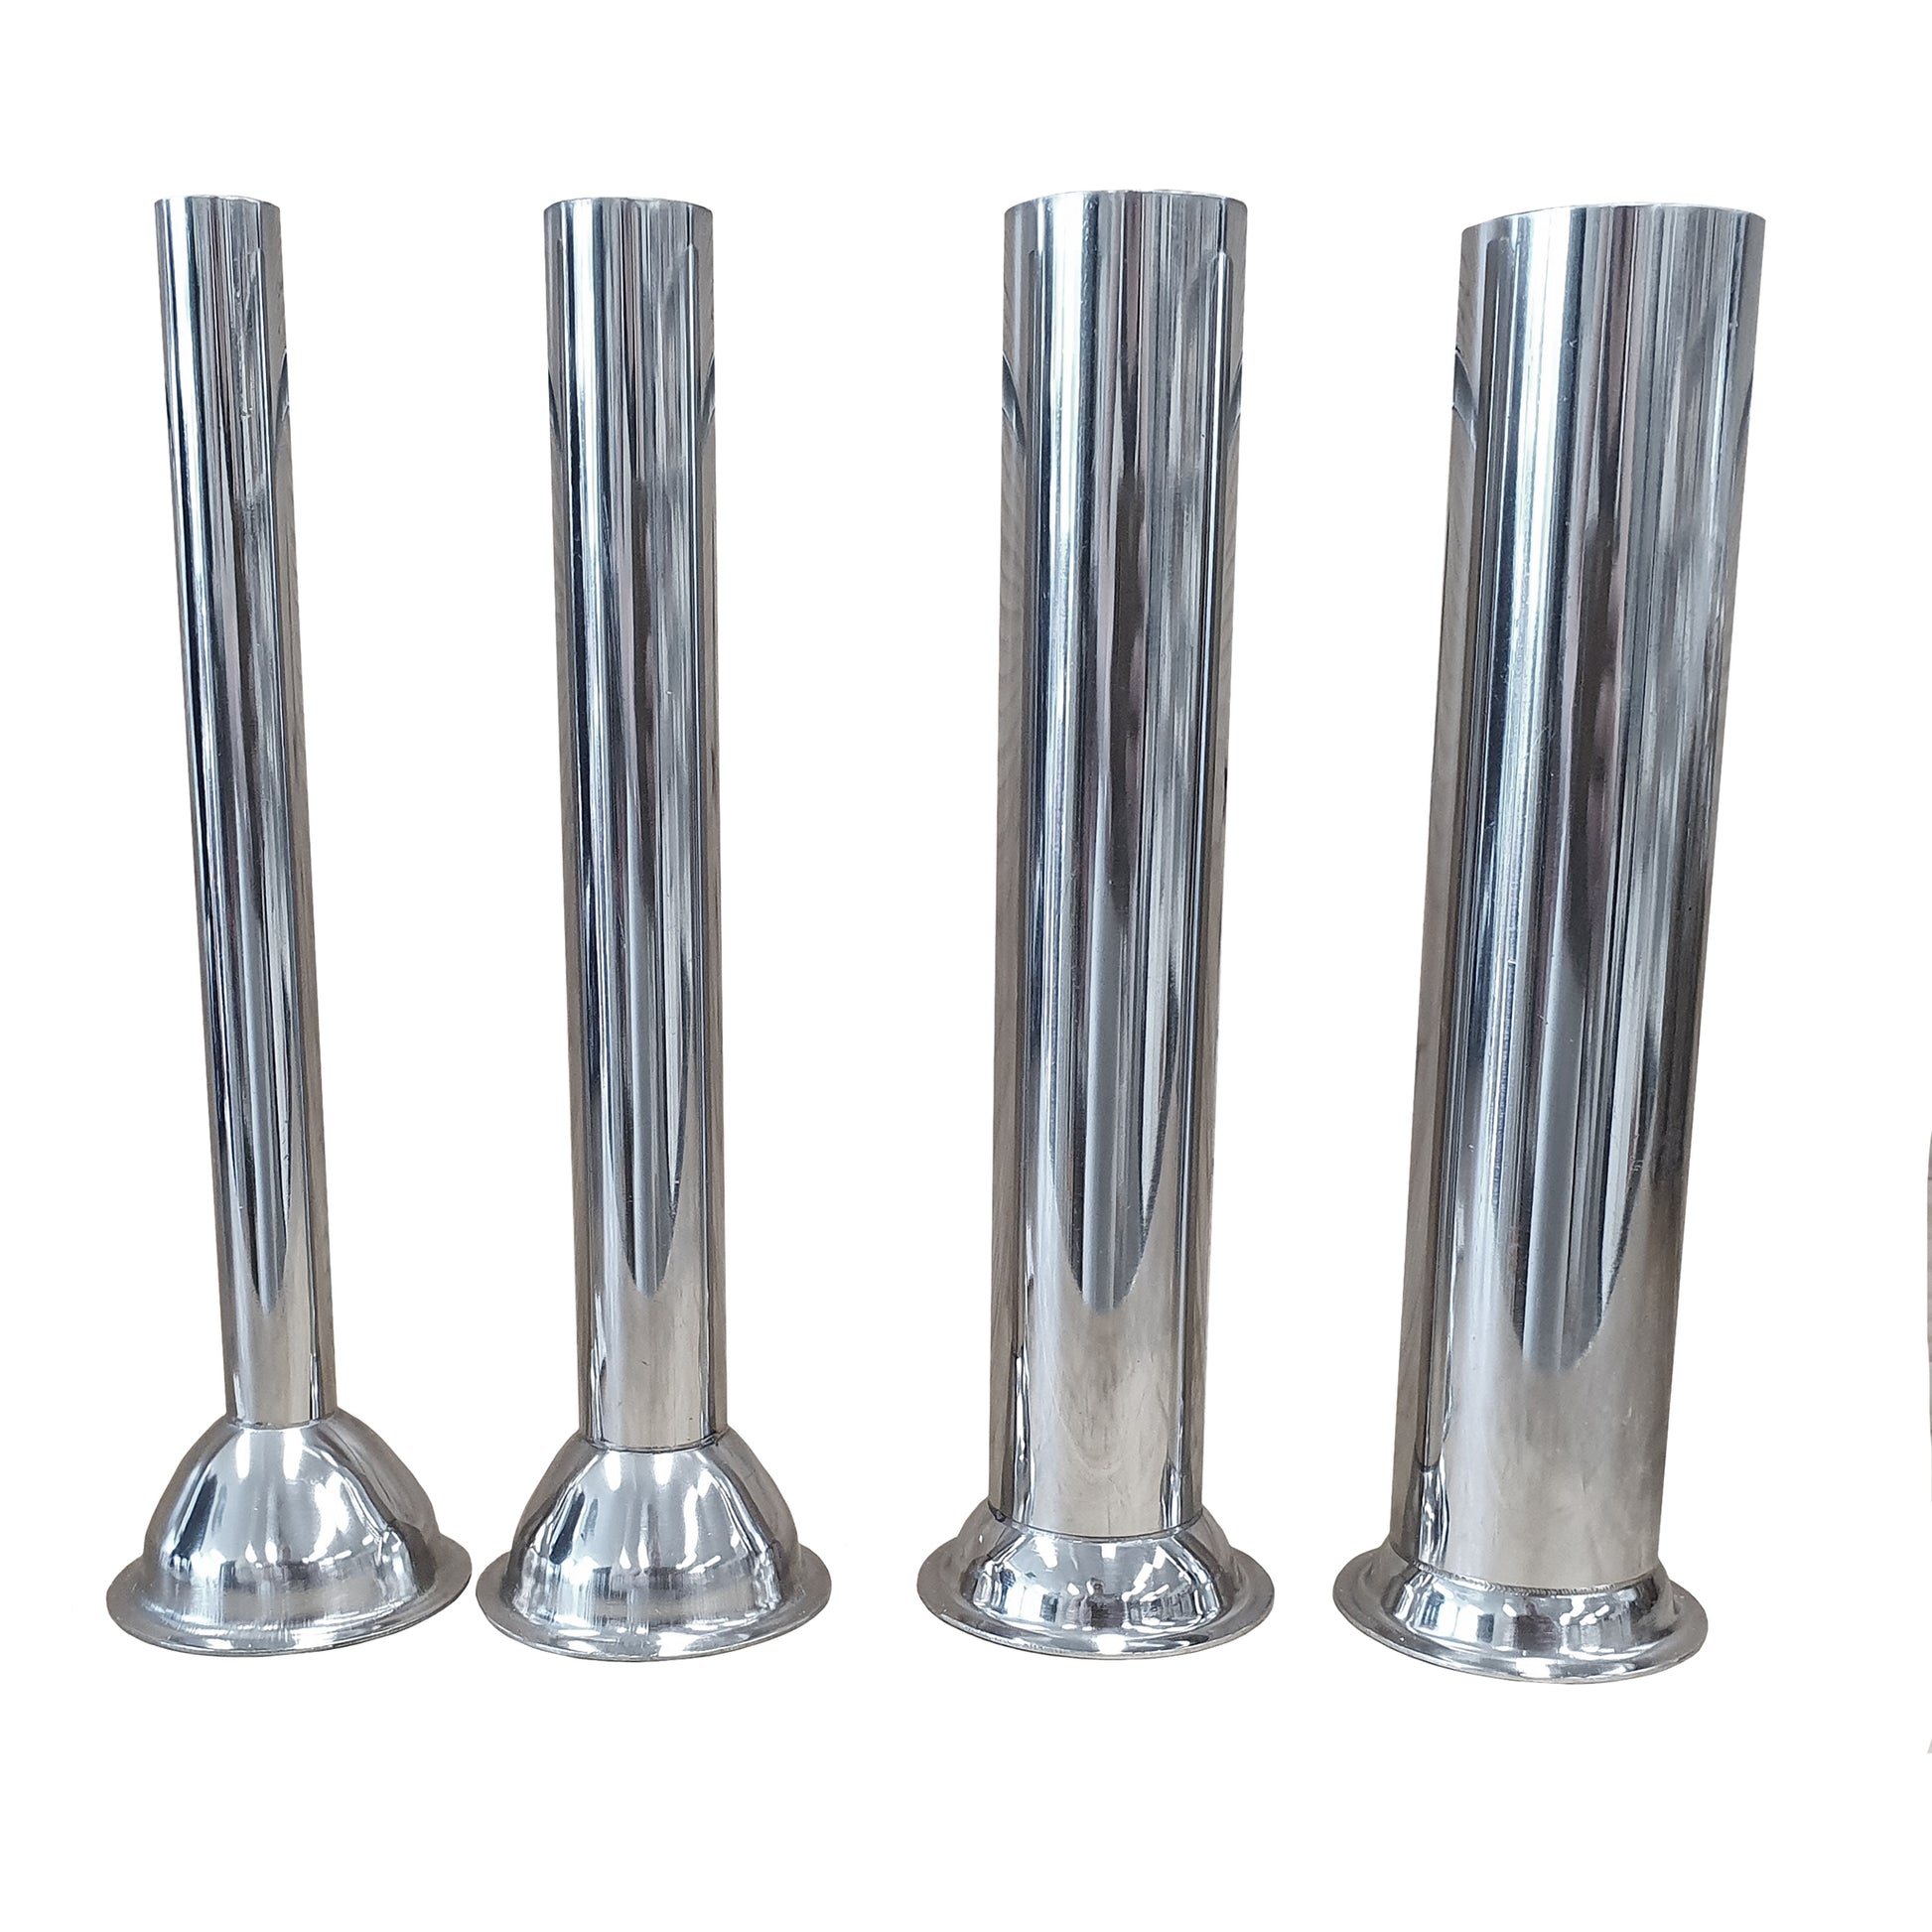 Four stainless steel funnels included. 16mm, 22mm, 32mm and 38mm.